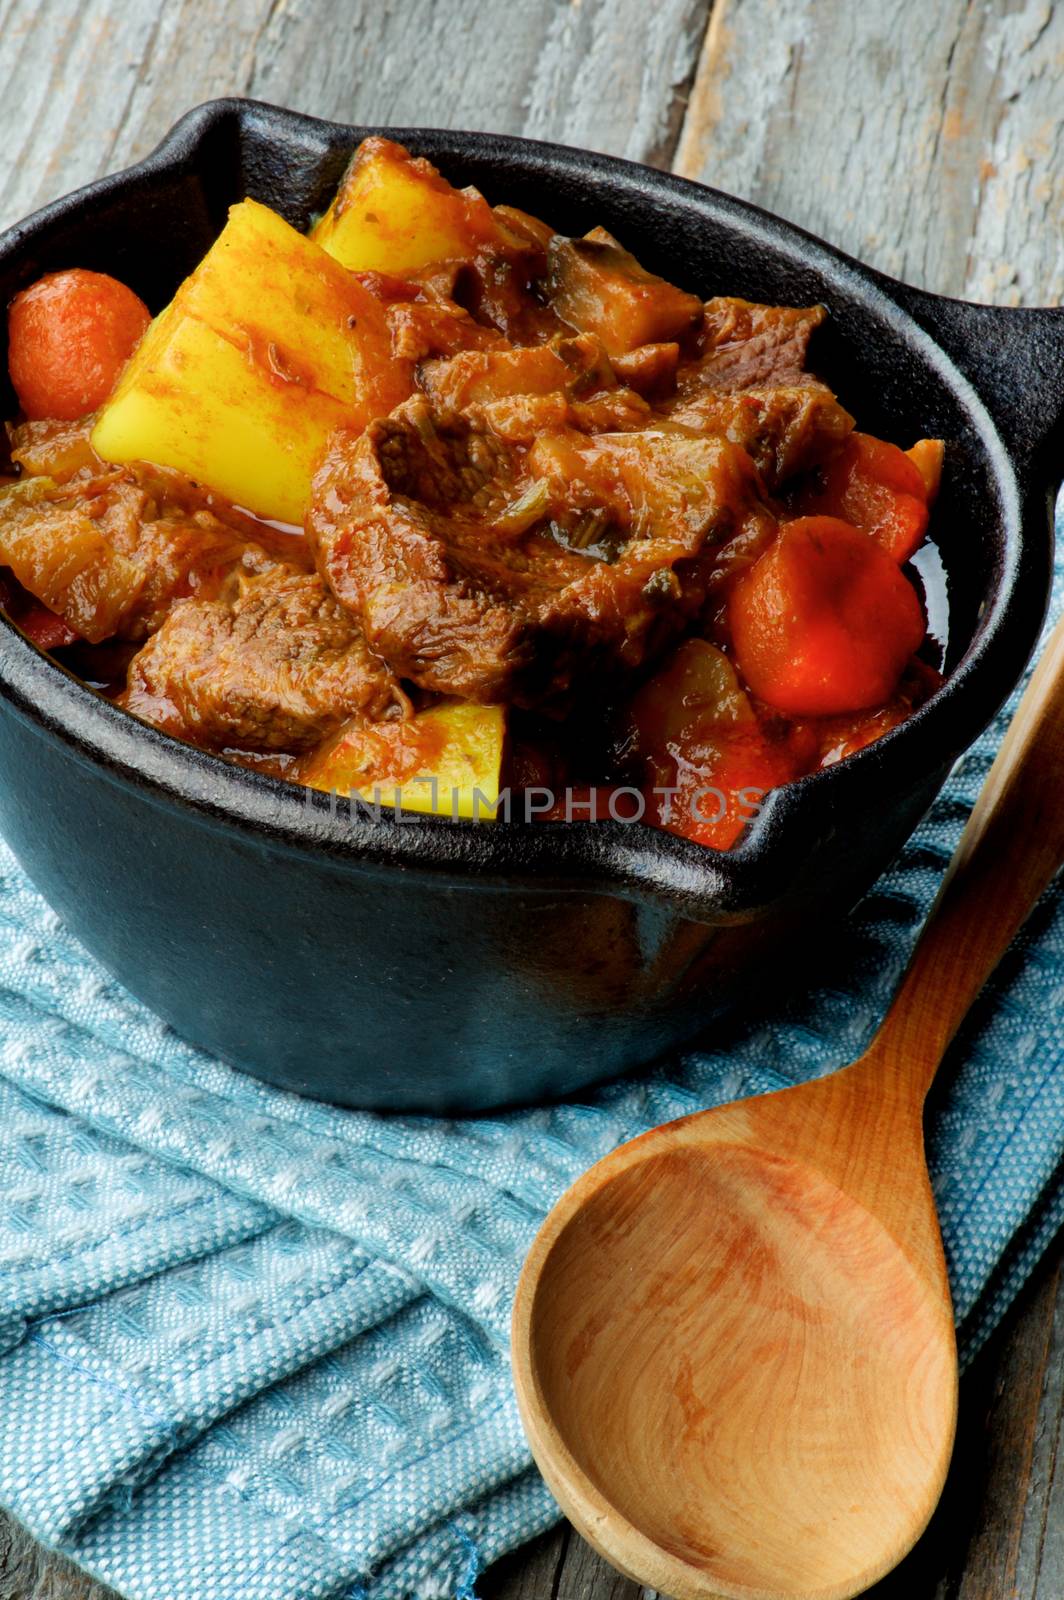 Beef and Vegetables Stew by zhekos